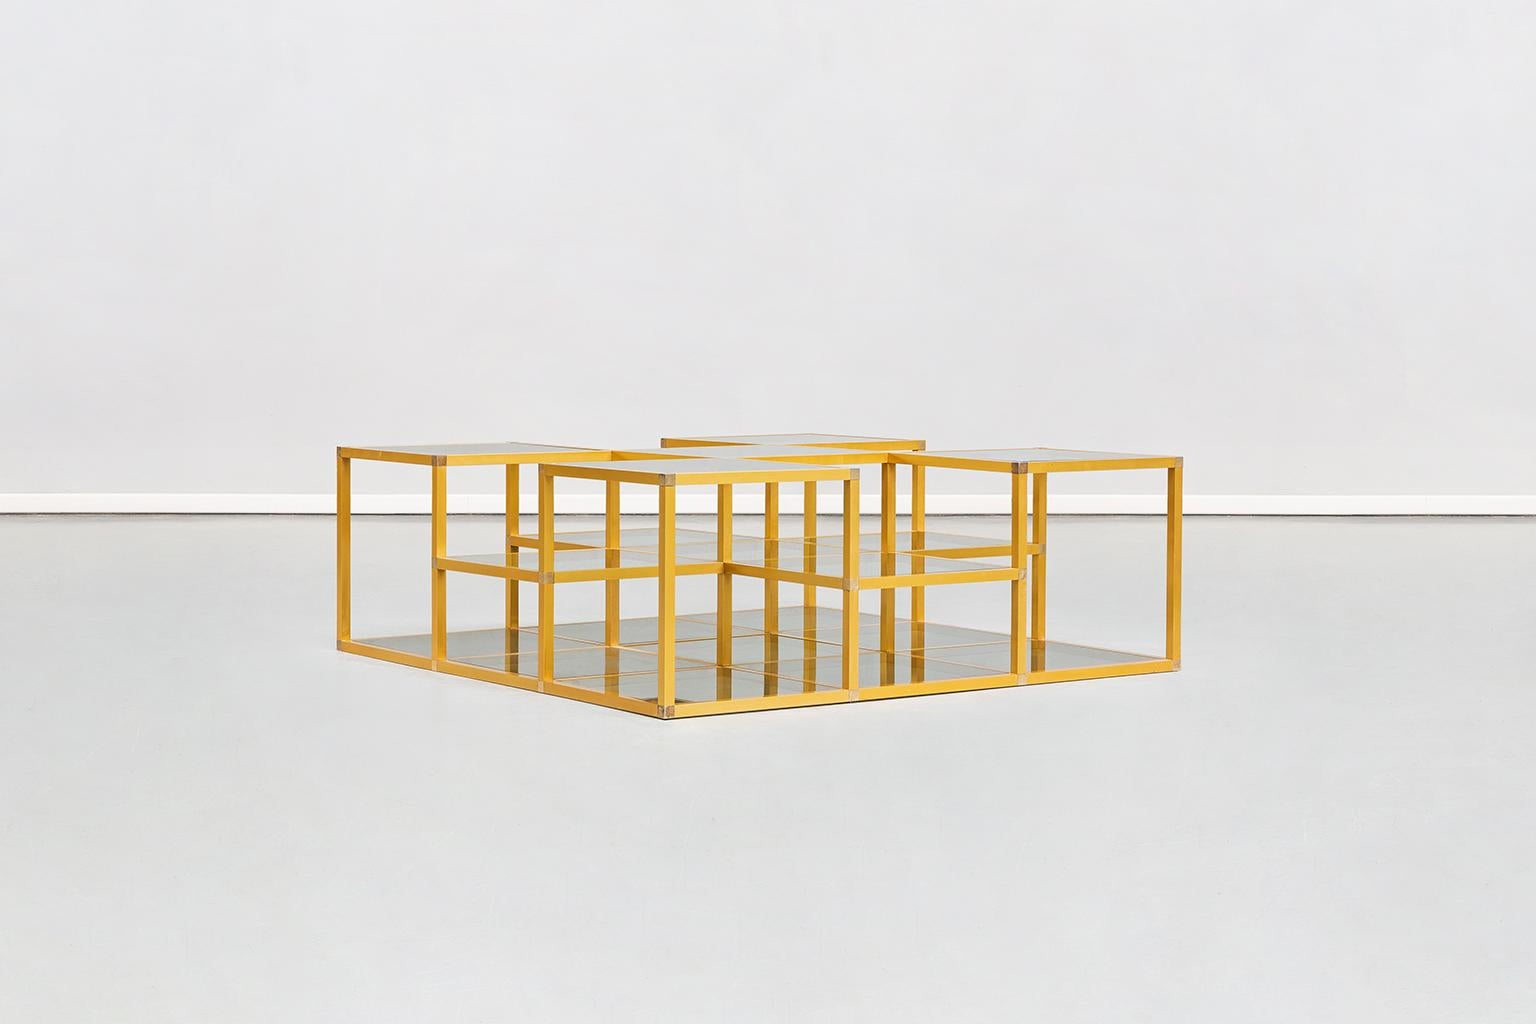 Multi-level Italian midcentury golden frame and smoked glass sofa table, 1960s
Multi-level Italian midcentury coffee table dating to the 1970s. Large structure with golden anodized aluminium frame, smoked multi-level glass tops, on the tones of